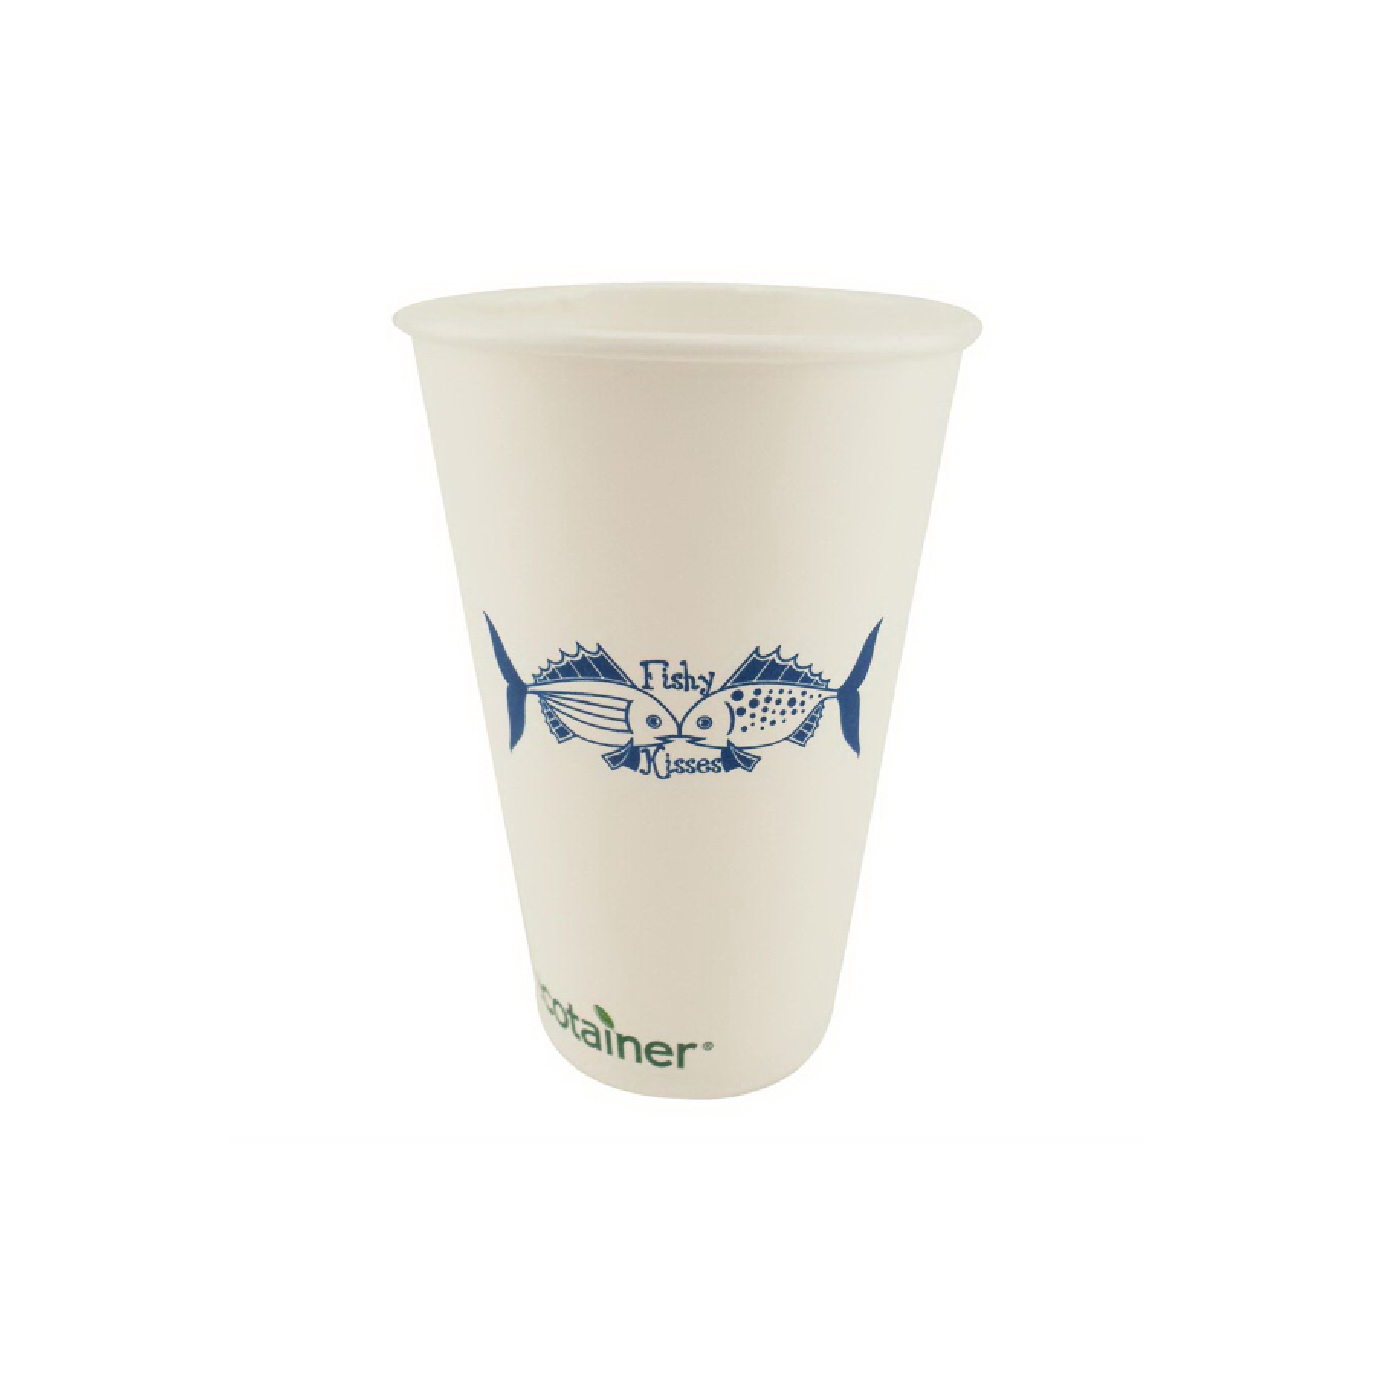 custom branded biodegradable party cup